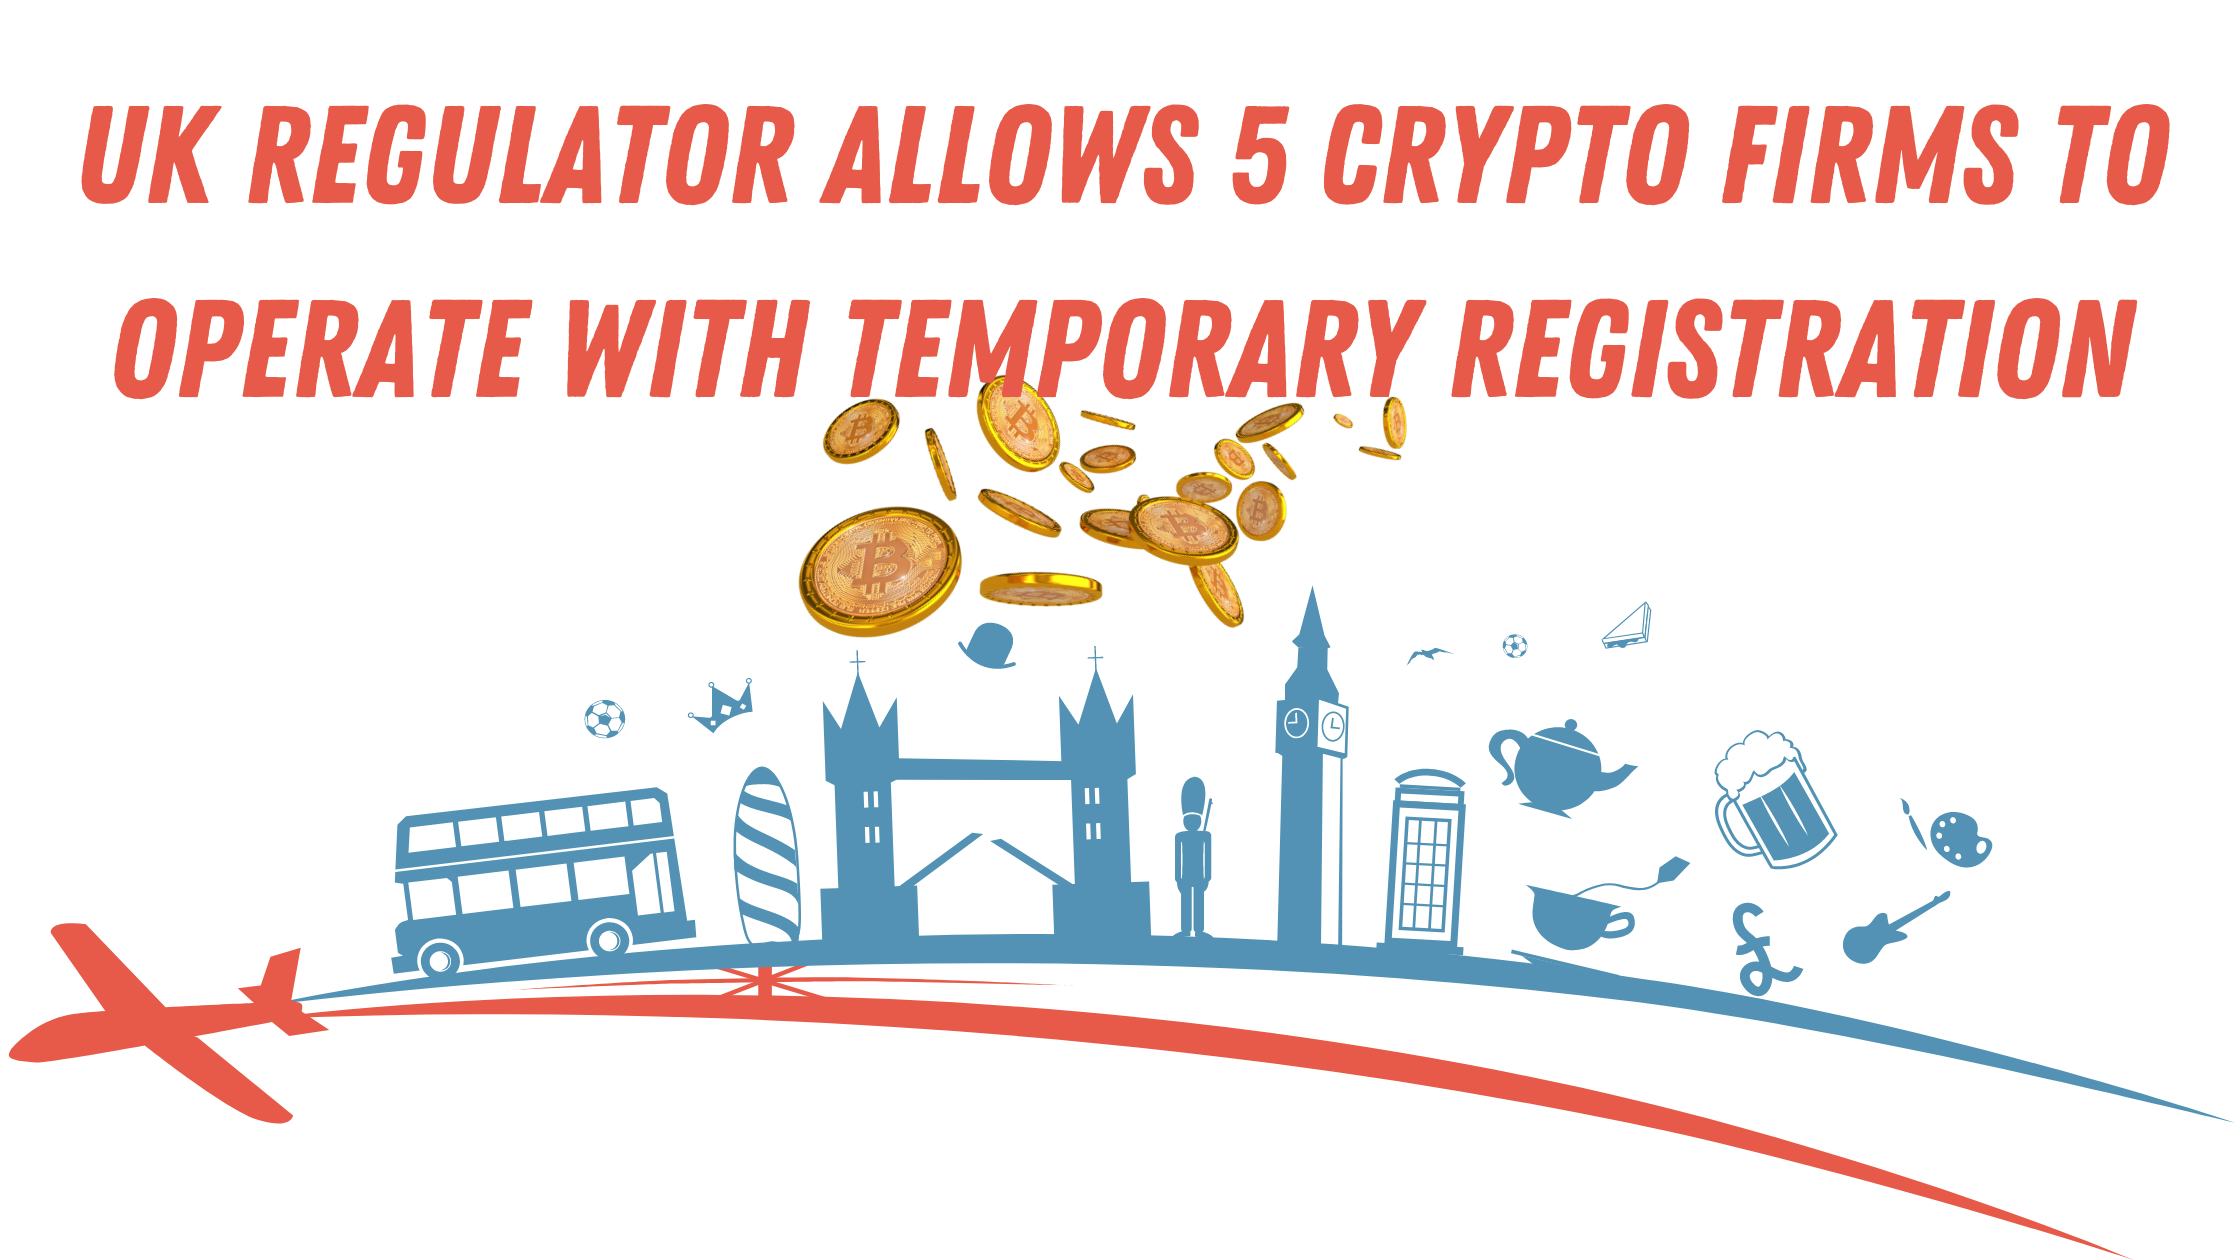 UK Regulator Allows 5 Crypto Firms to Operate With Temporary Registration